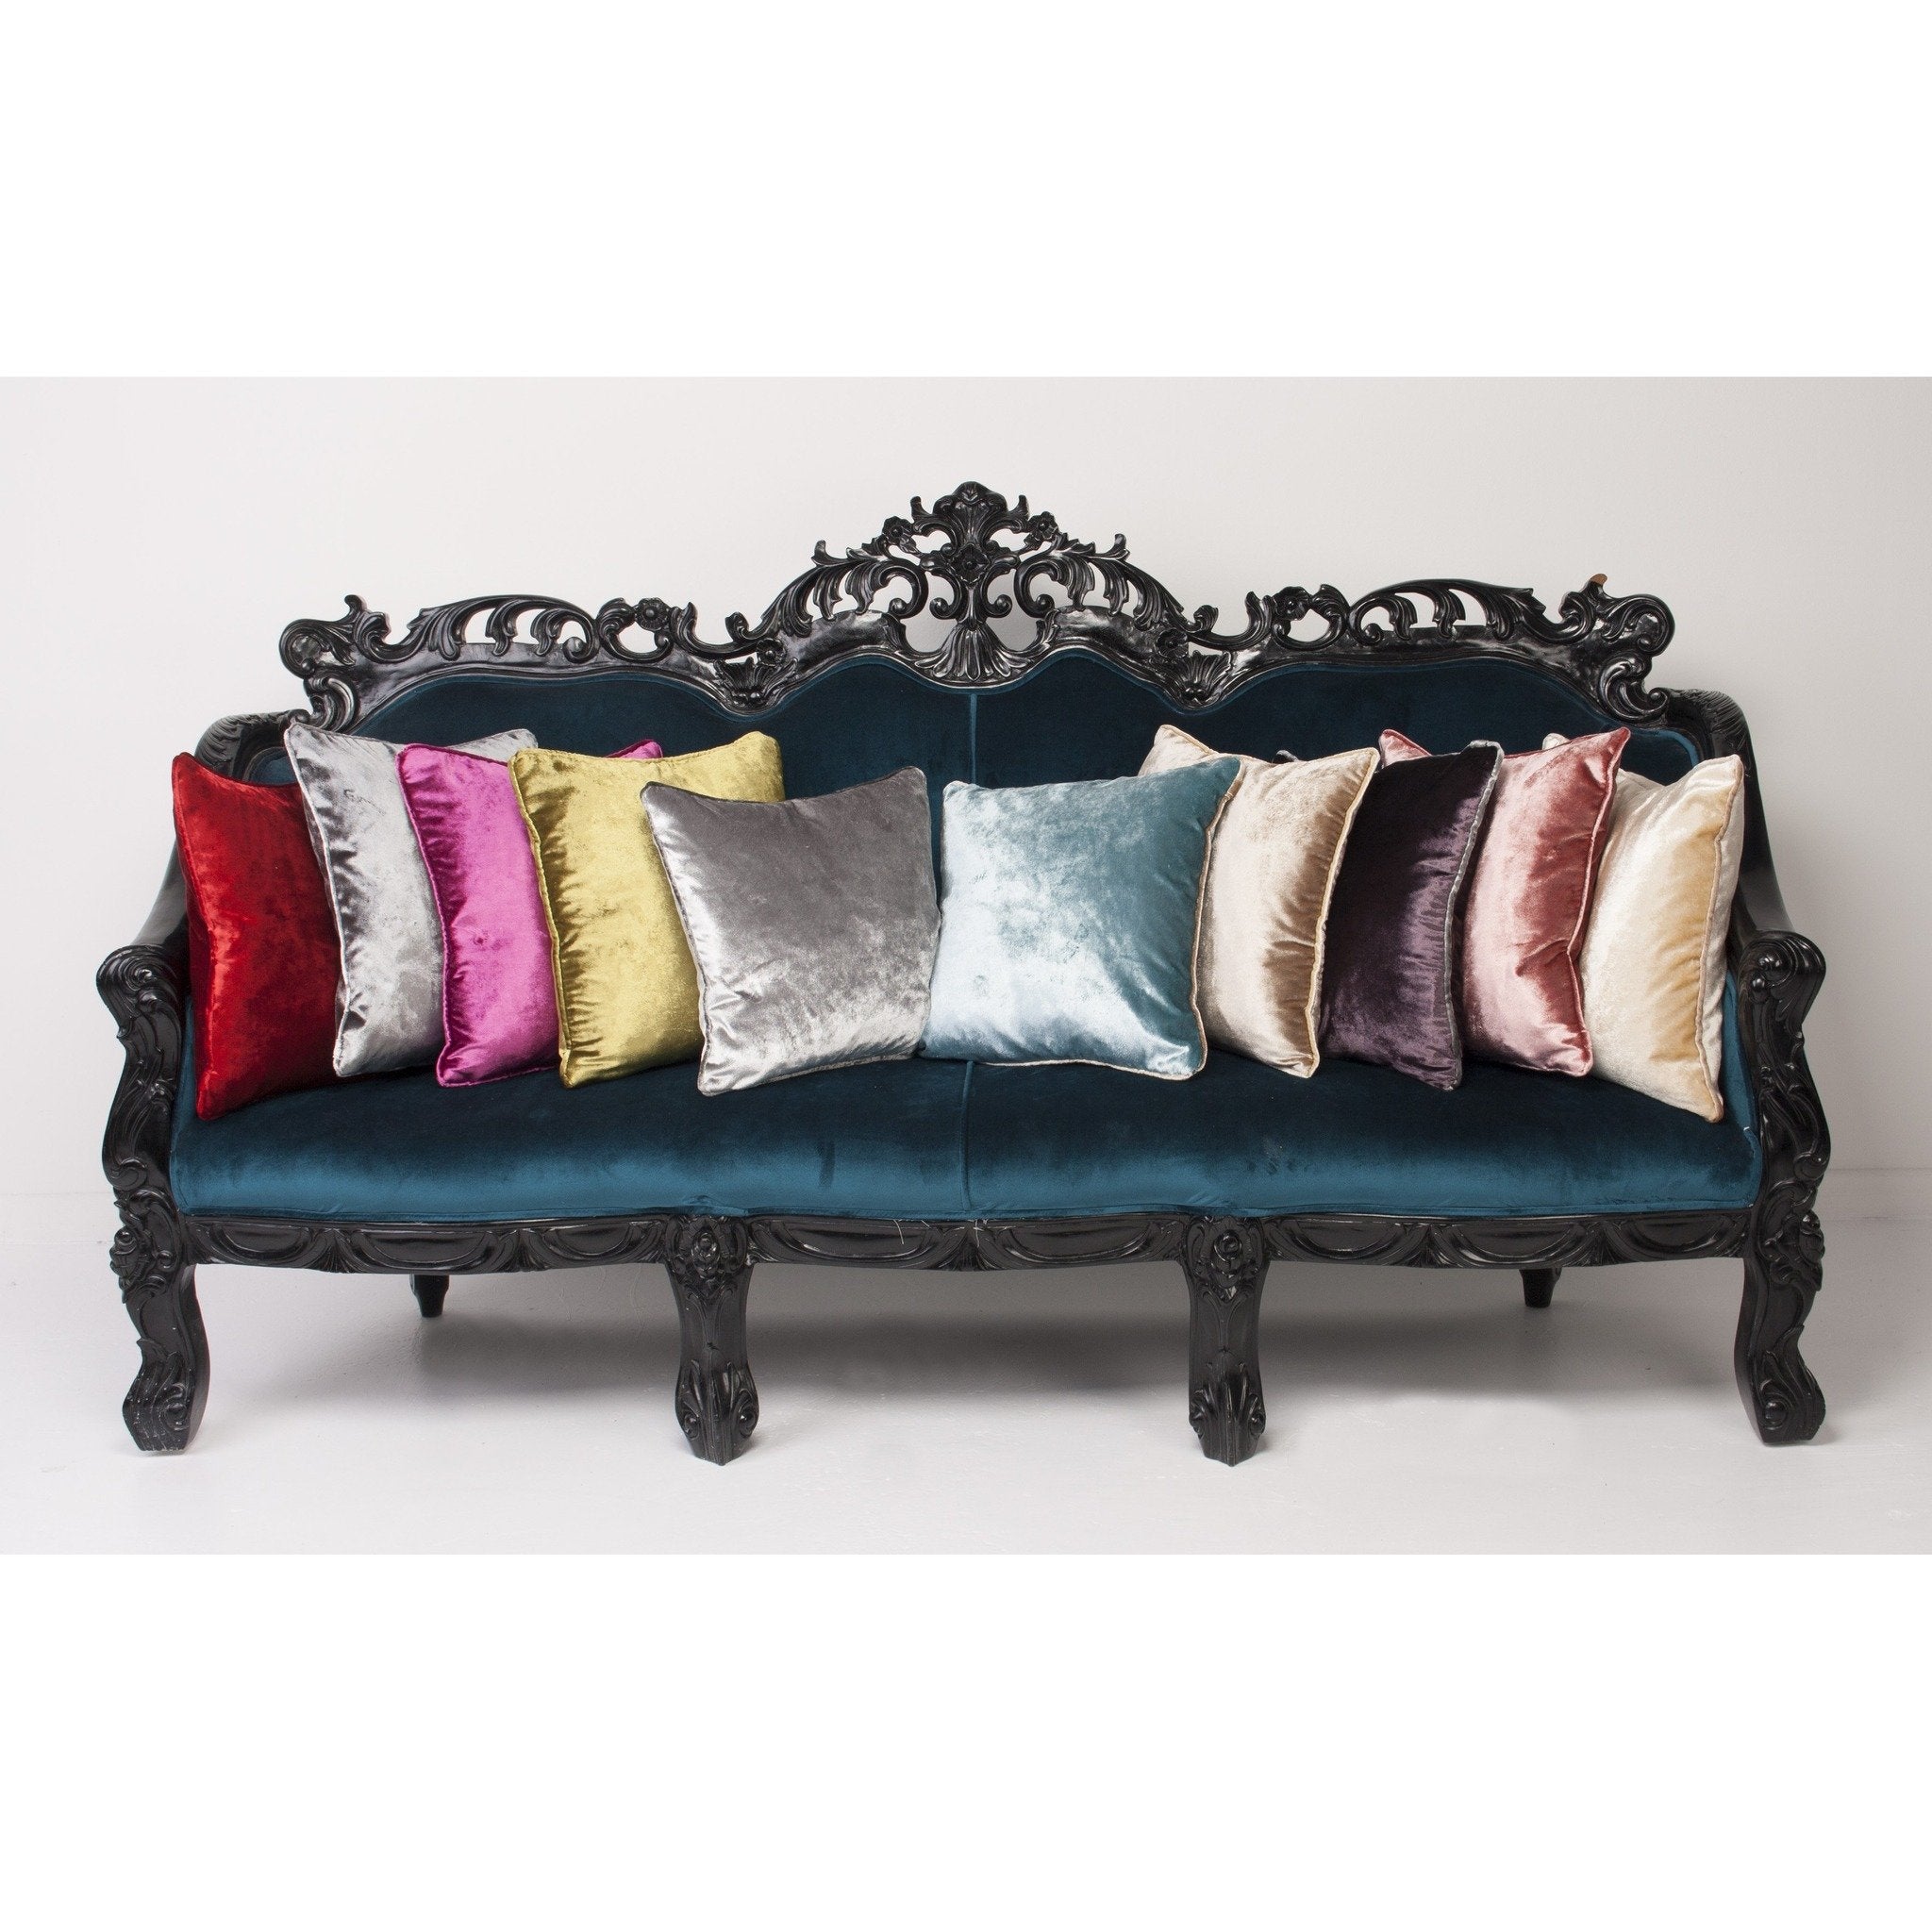 McAlister Textiles Black Crushed Velvet Cushions Cushions and Covers 